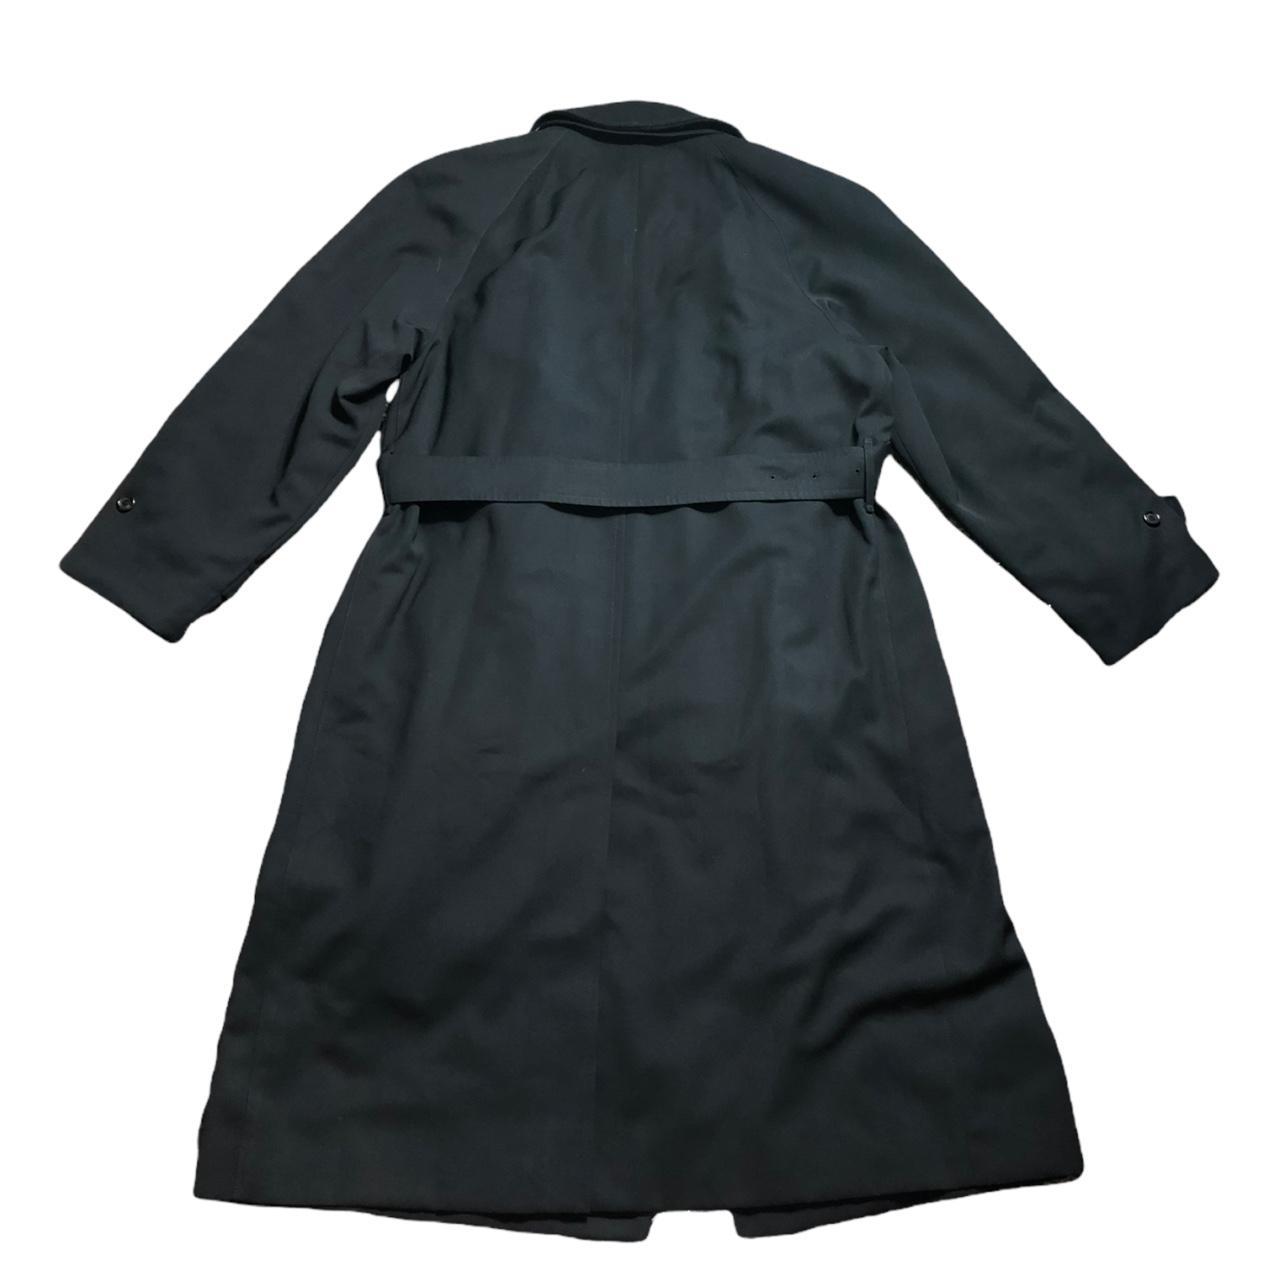 Product Image 3 - Burberry Lawrence Black Overcoat
Size: 44